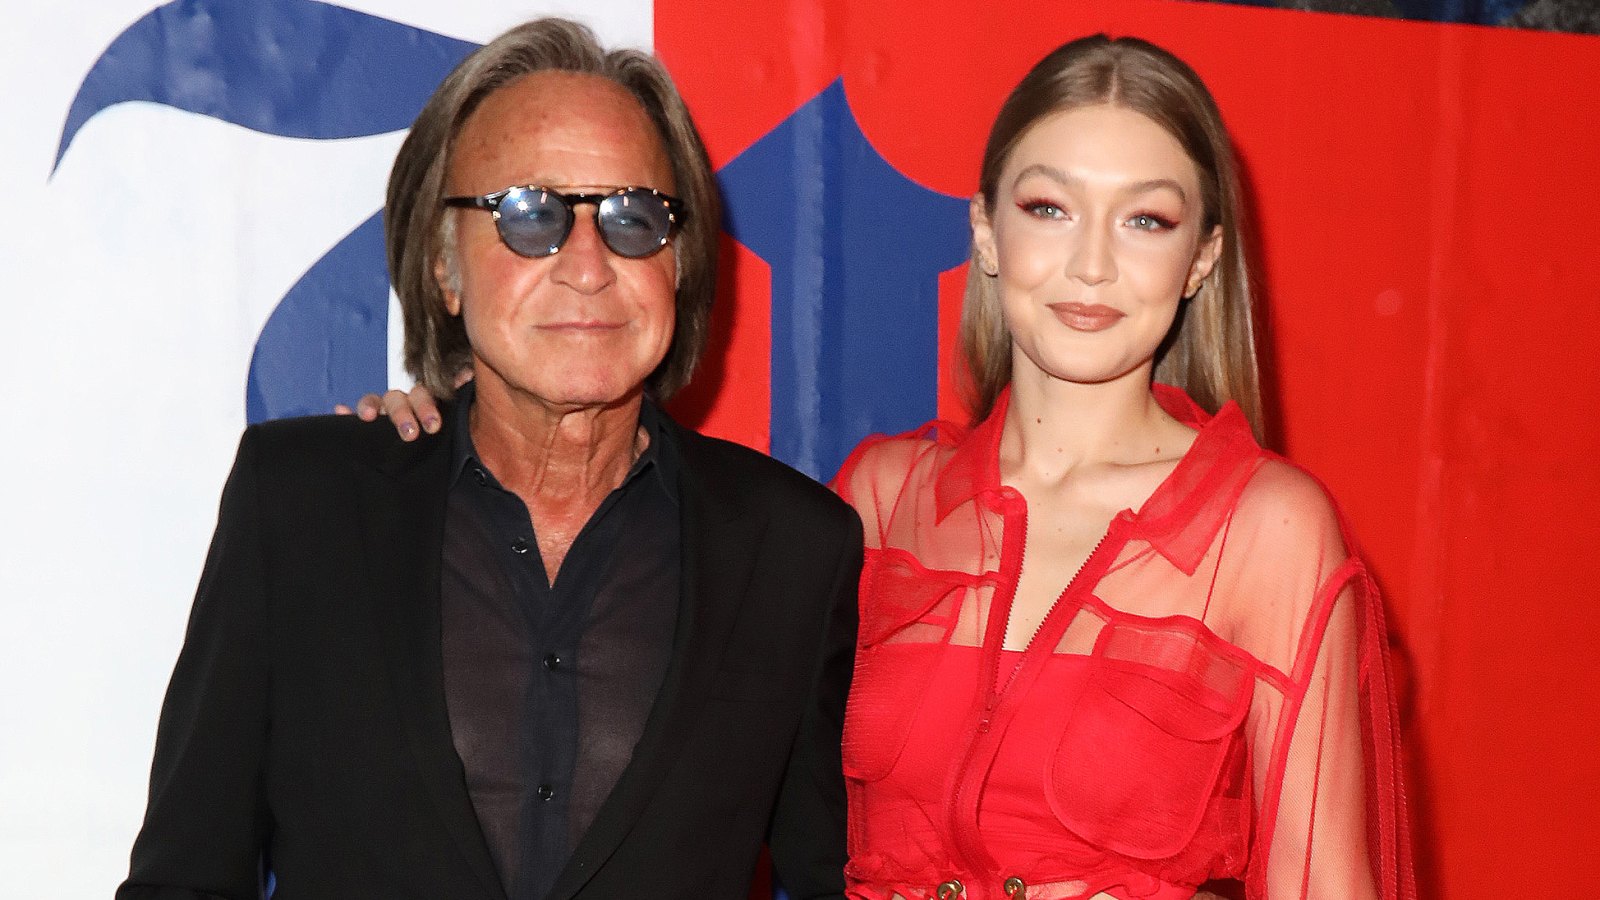 Pregnant Gigi Hadid Dad Mohamed Hadid Confirms She Has Not Given Birth Yet Amid Speculation